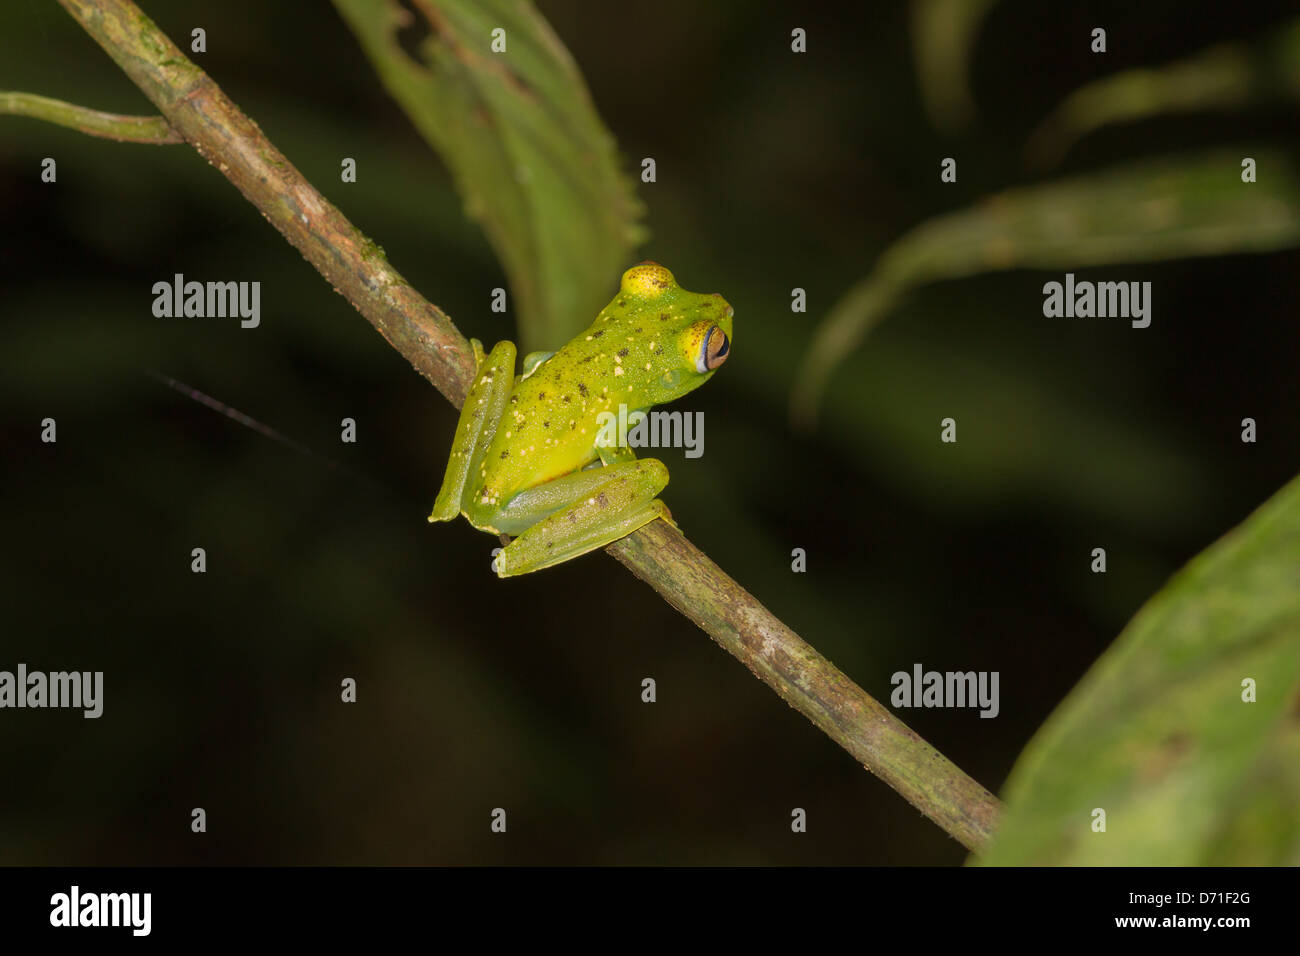 Glass Frog or Glassfrog (unidentified species) Stock Photo